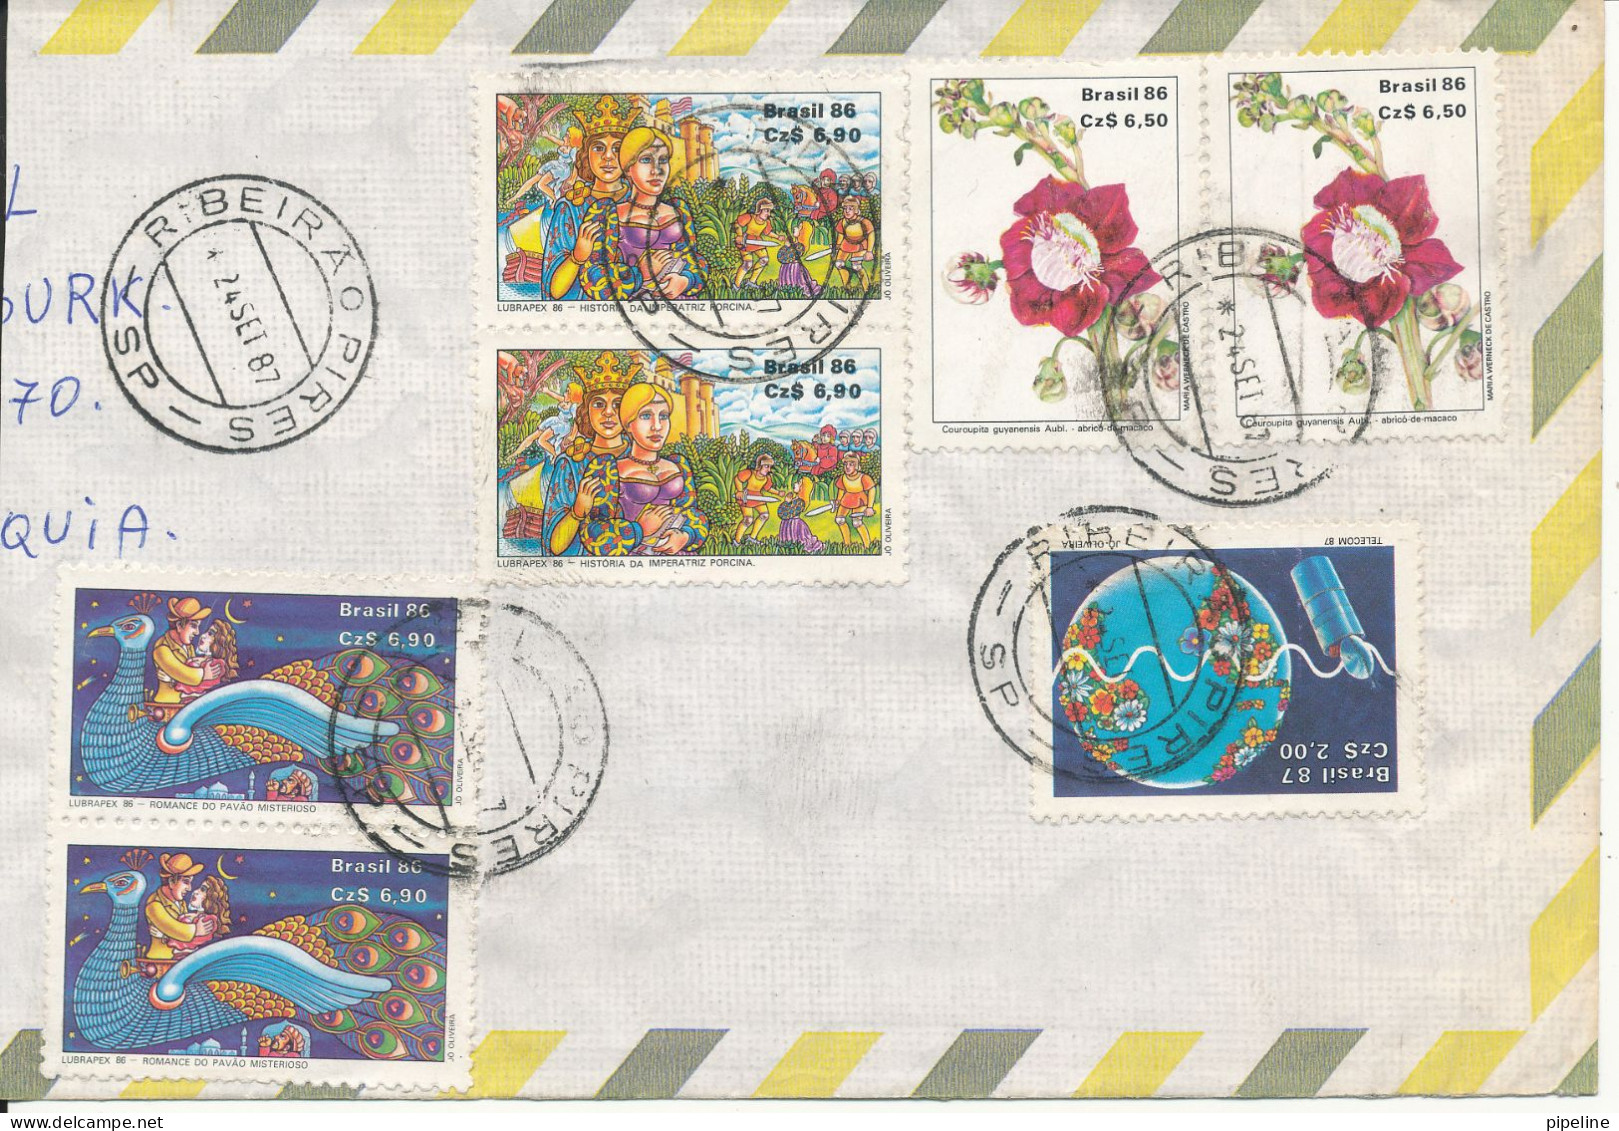 Brazil Air Mail Cover Sent To Czechoslovakia 24-9-1987 With A Lot Of Stamps (the Cover Is Cut In The Left Side) - Posta Aerea